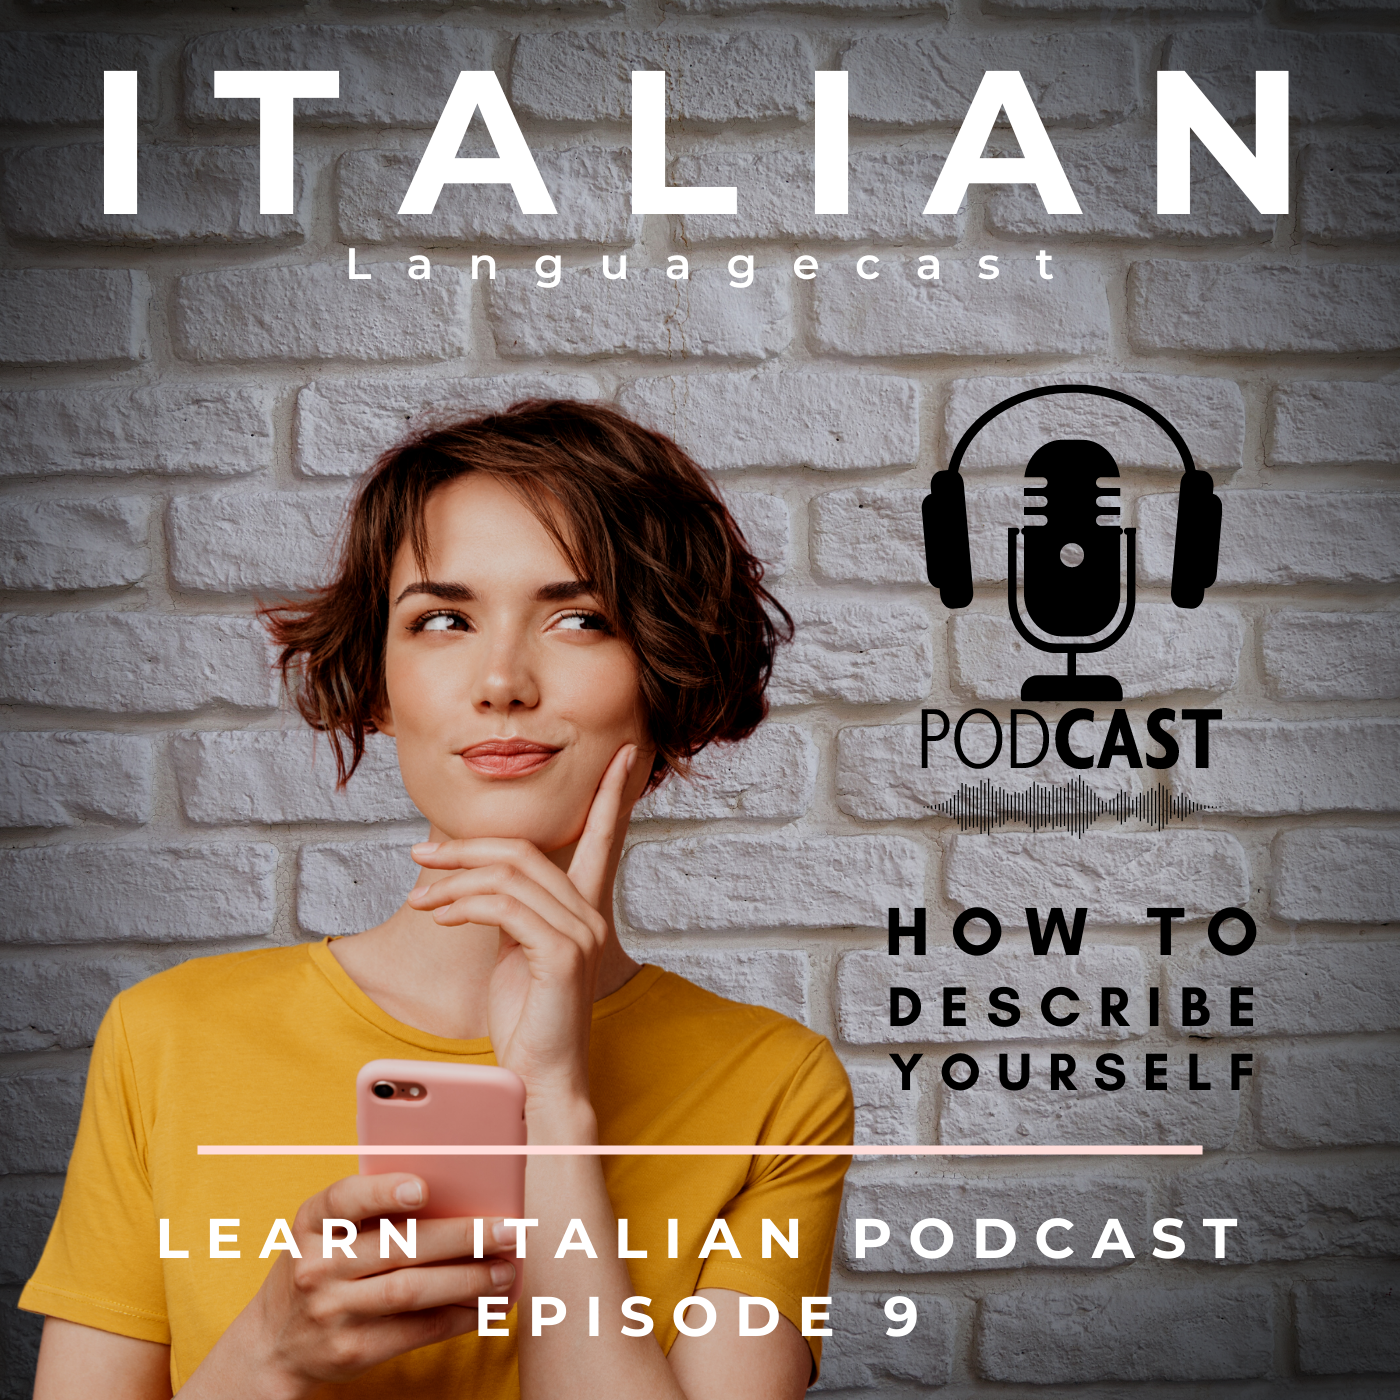 Learn Italian Podcast: How to Describe Yourself (Episode 9)